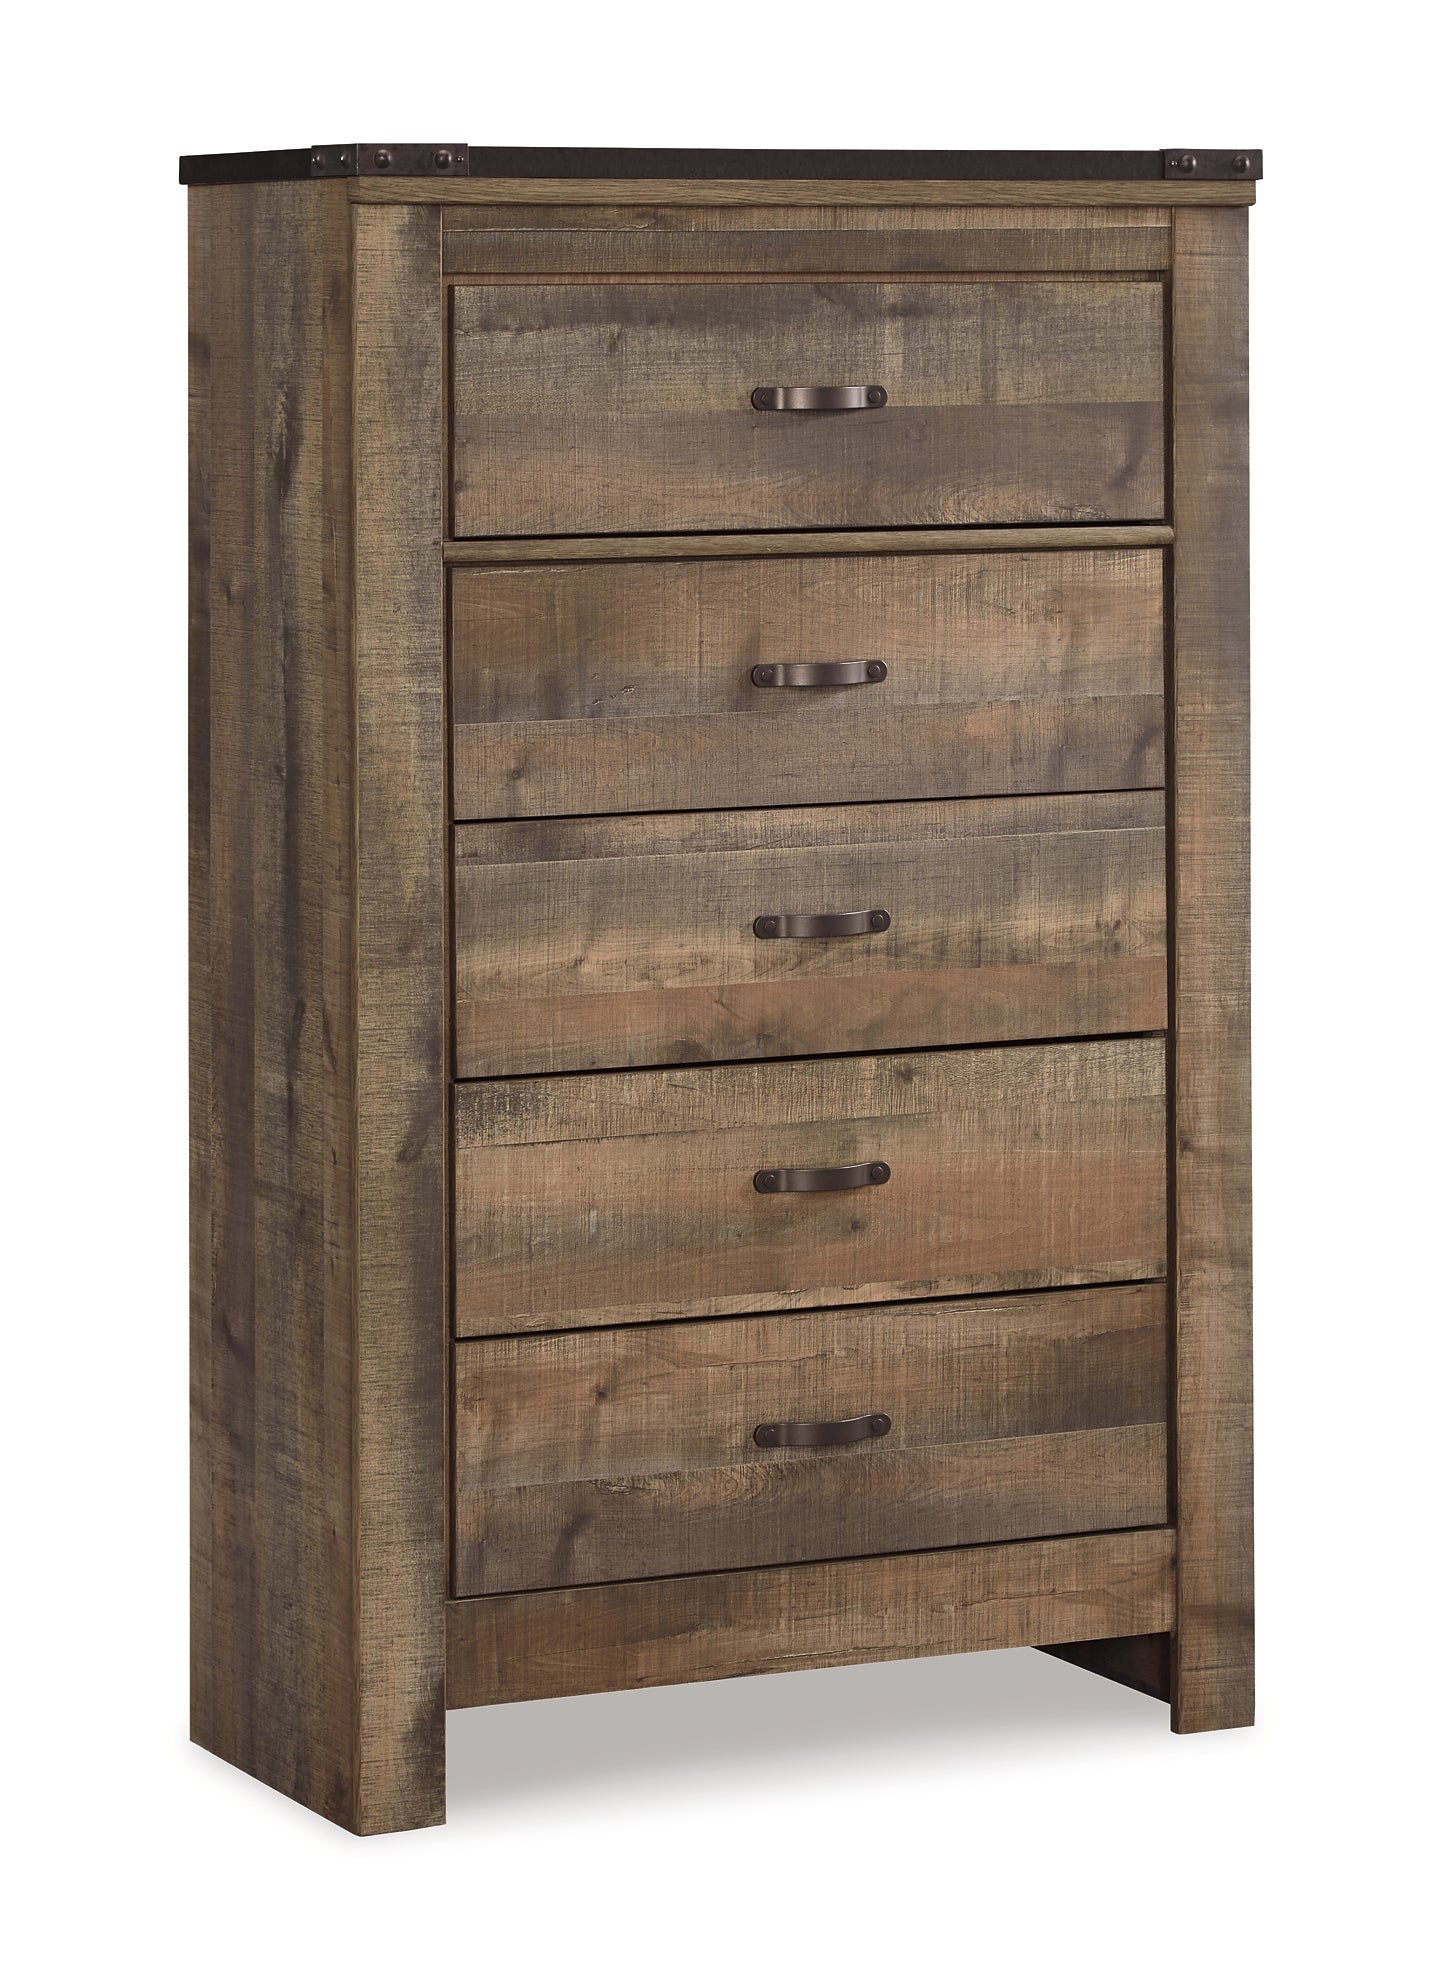 Trinell Queen Poster Bed with Dresser, Chest and Nightstand